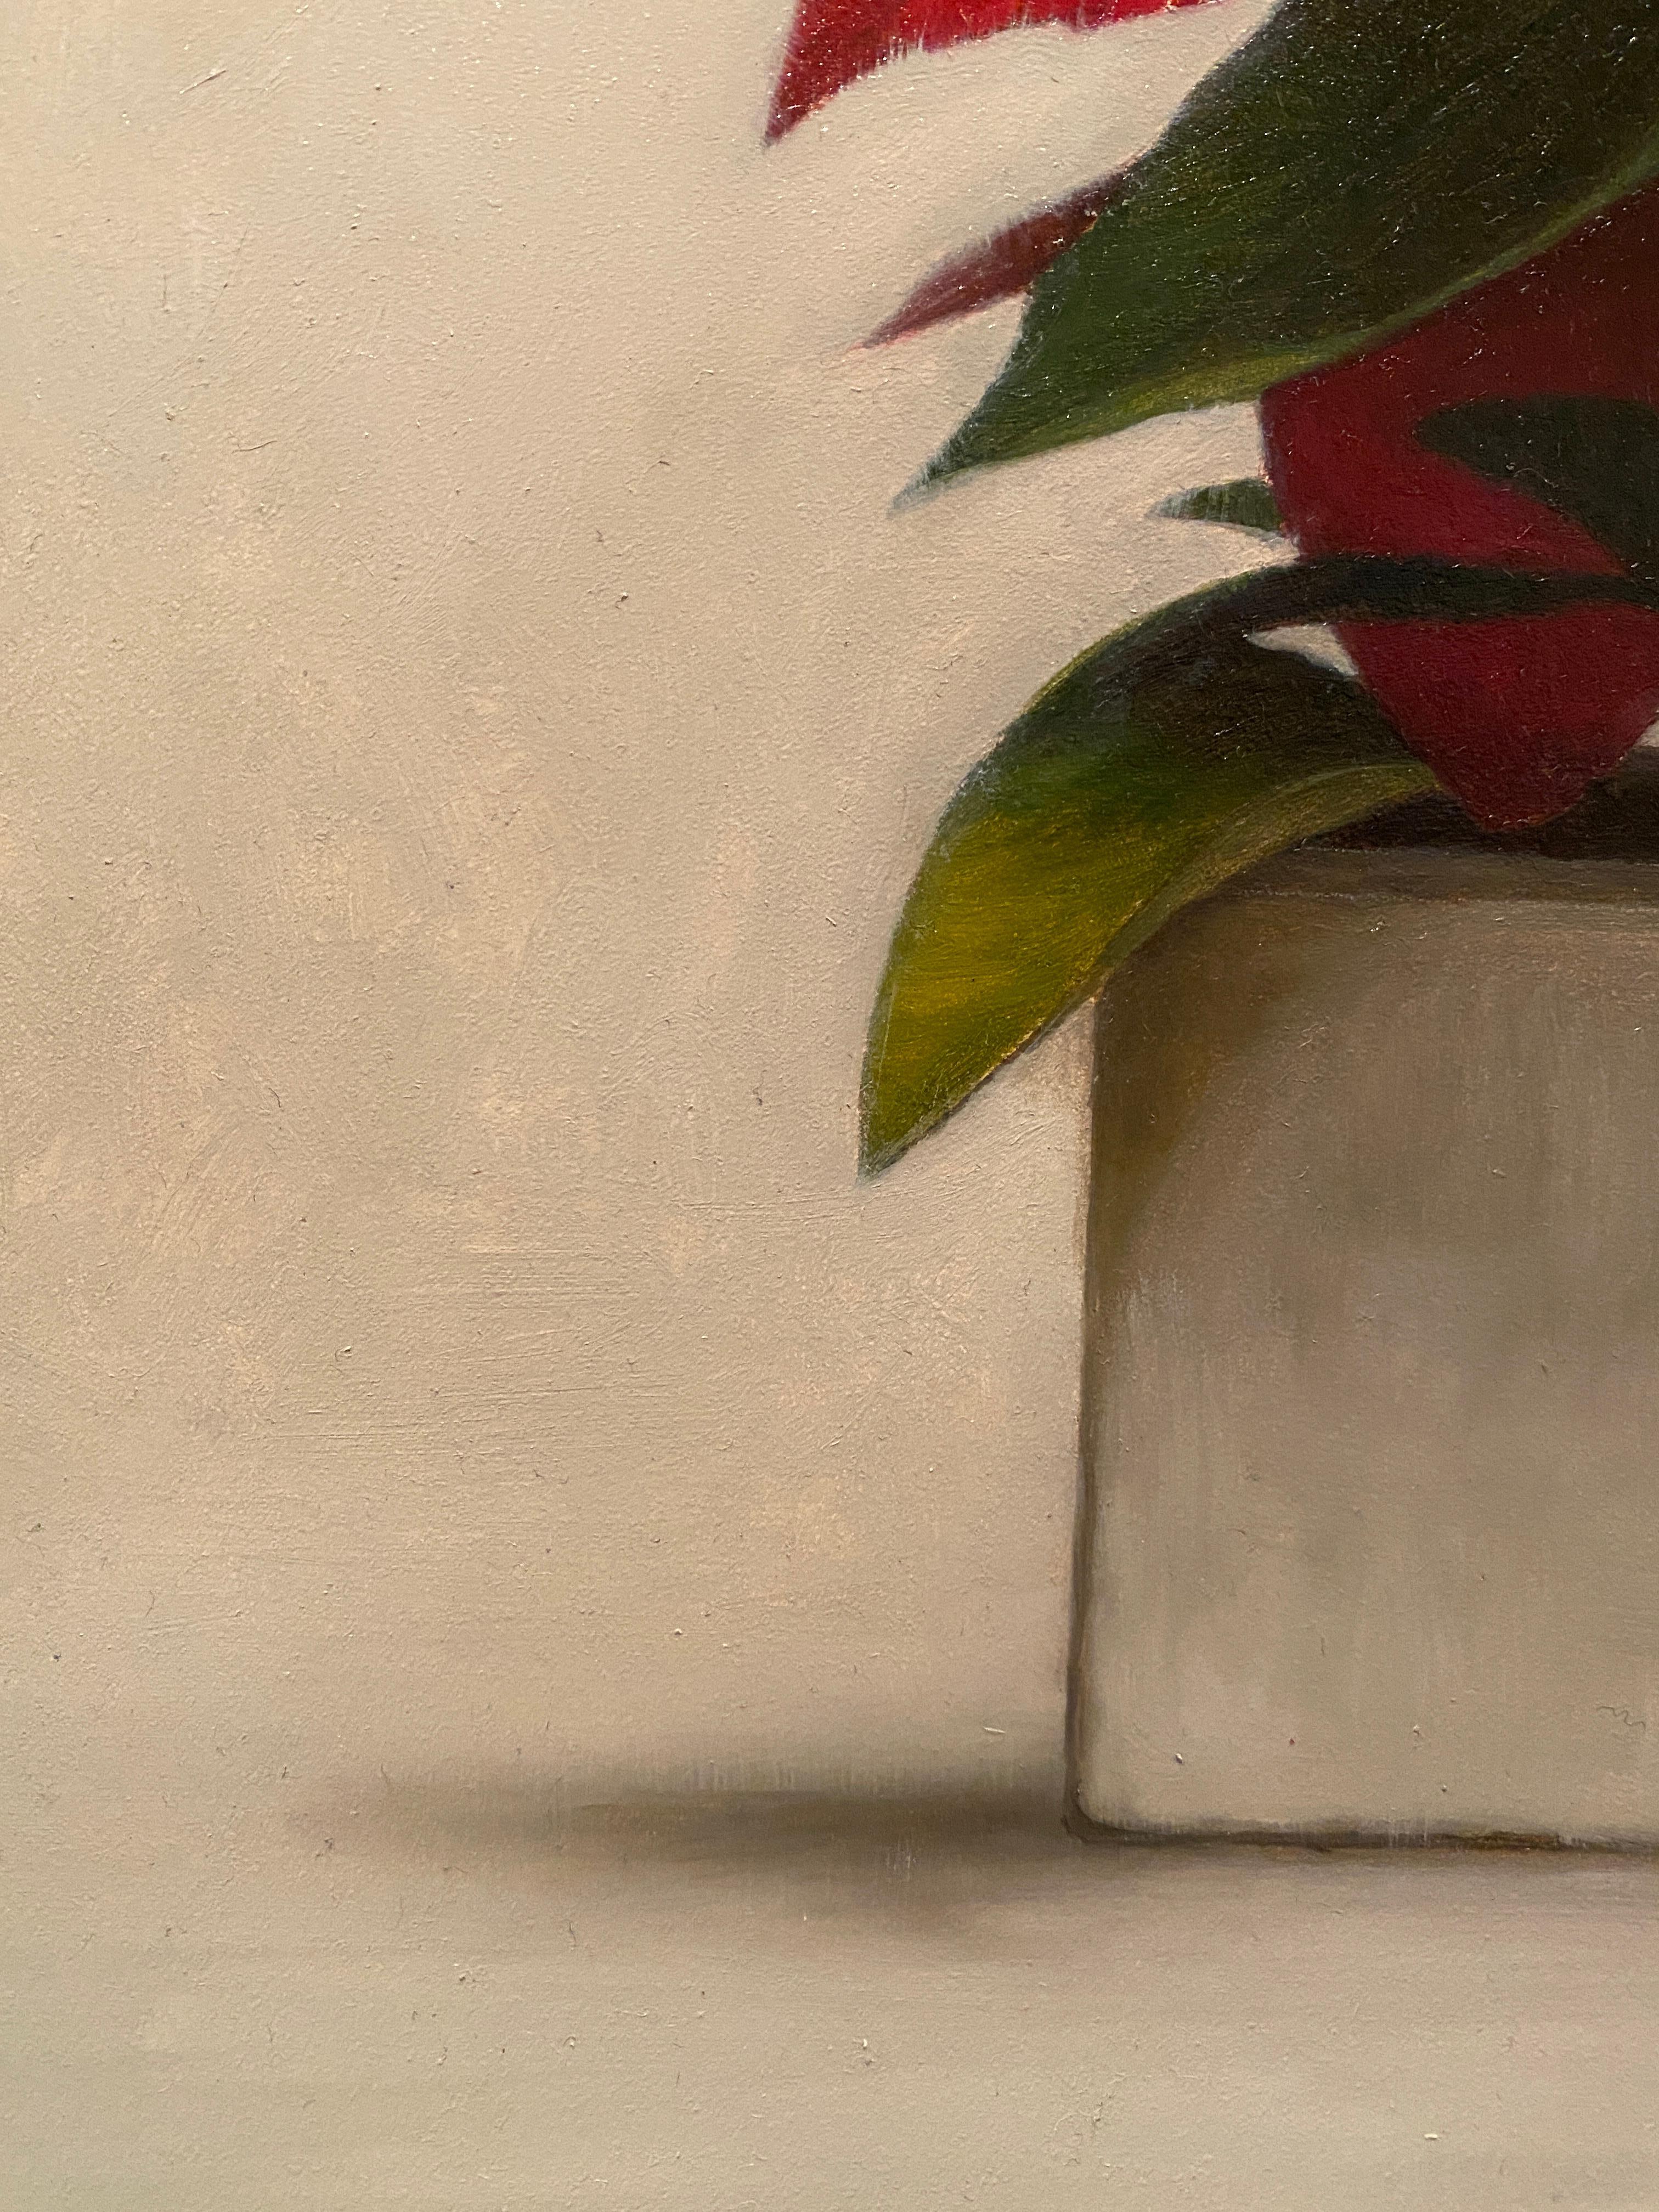 Poinsettia - American Realist Painting by Matthew Weigle